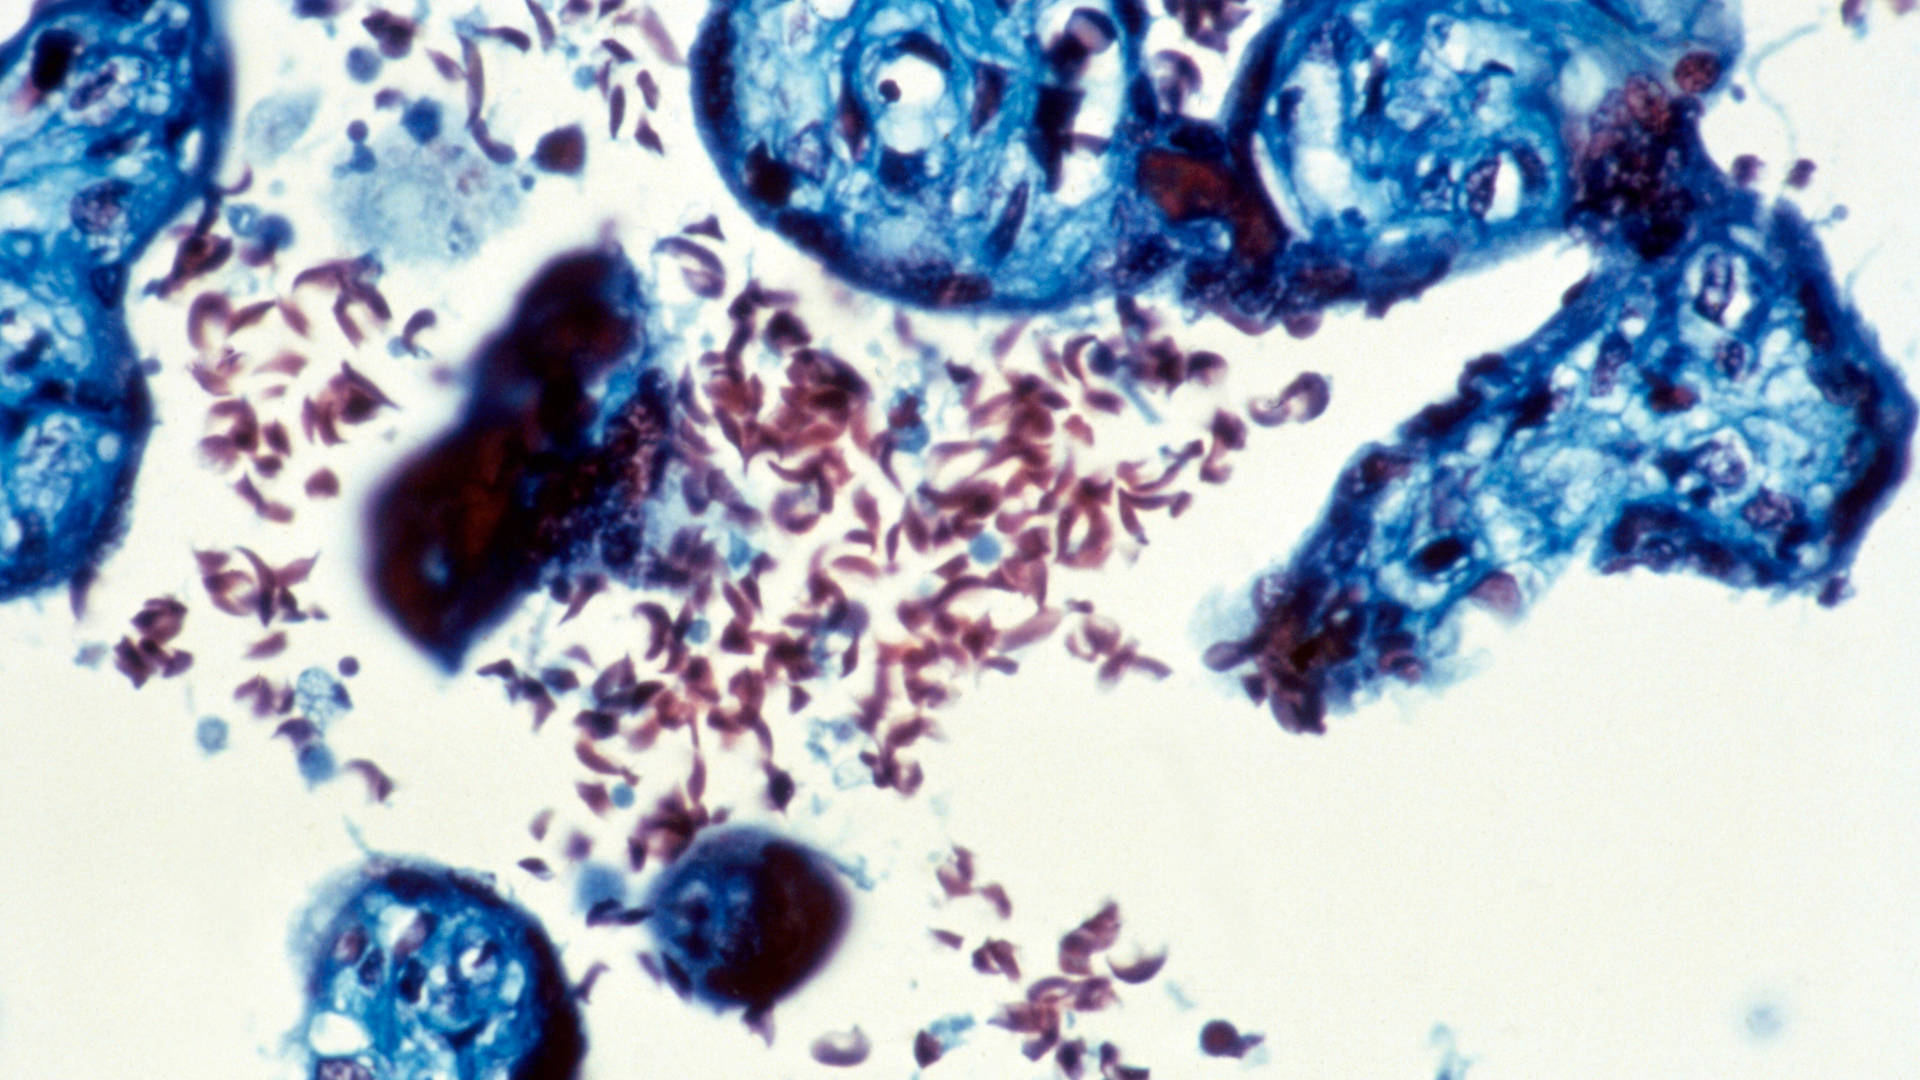 Microscope image of the placenta from a woman with sickle cell disease, showing sickled red blood cells (purple) and placental villi (blue).